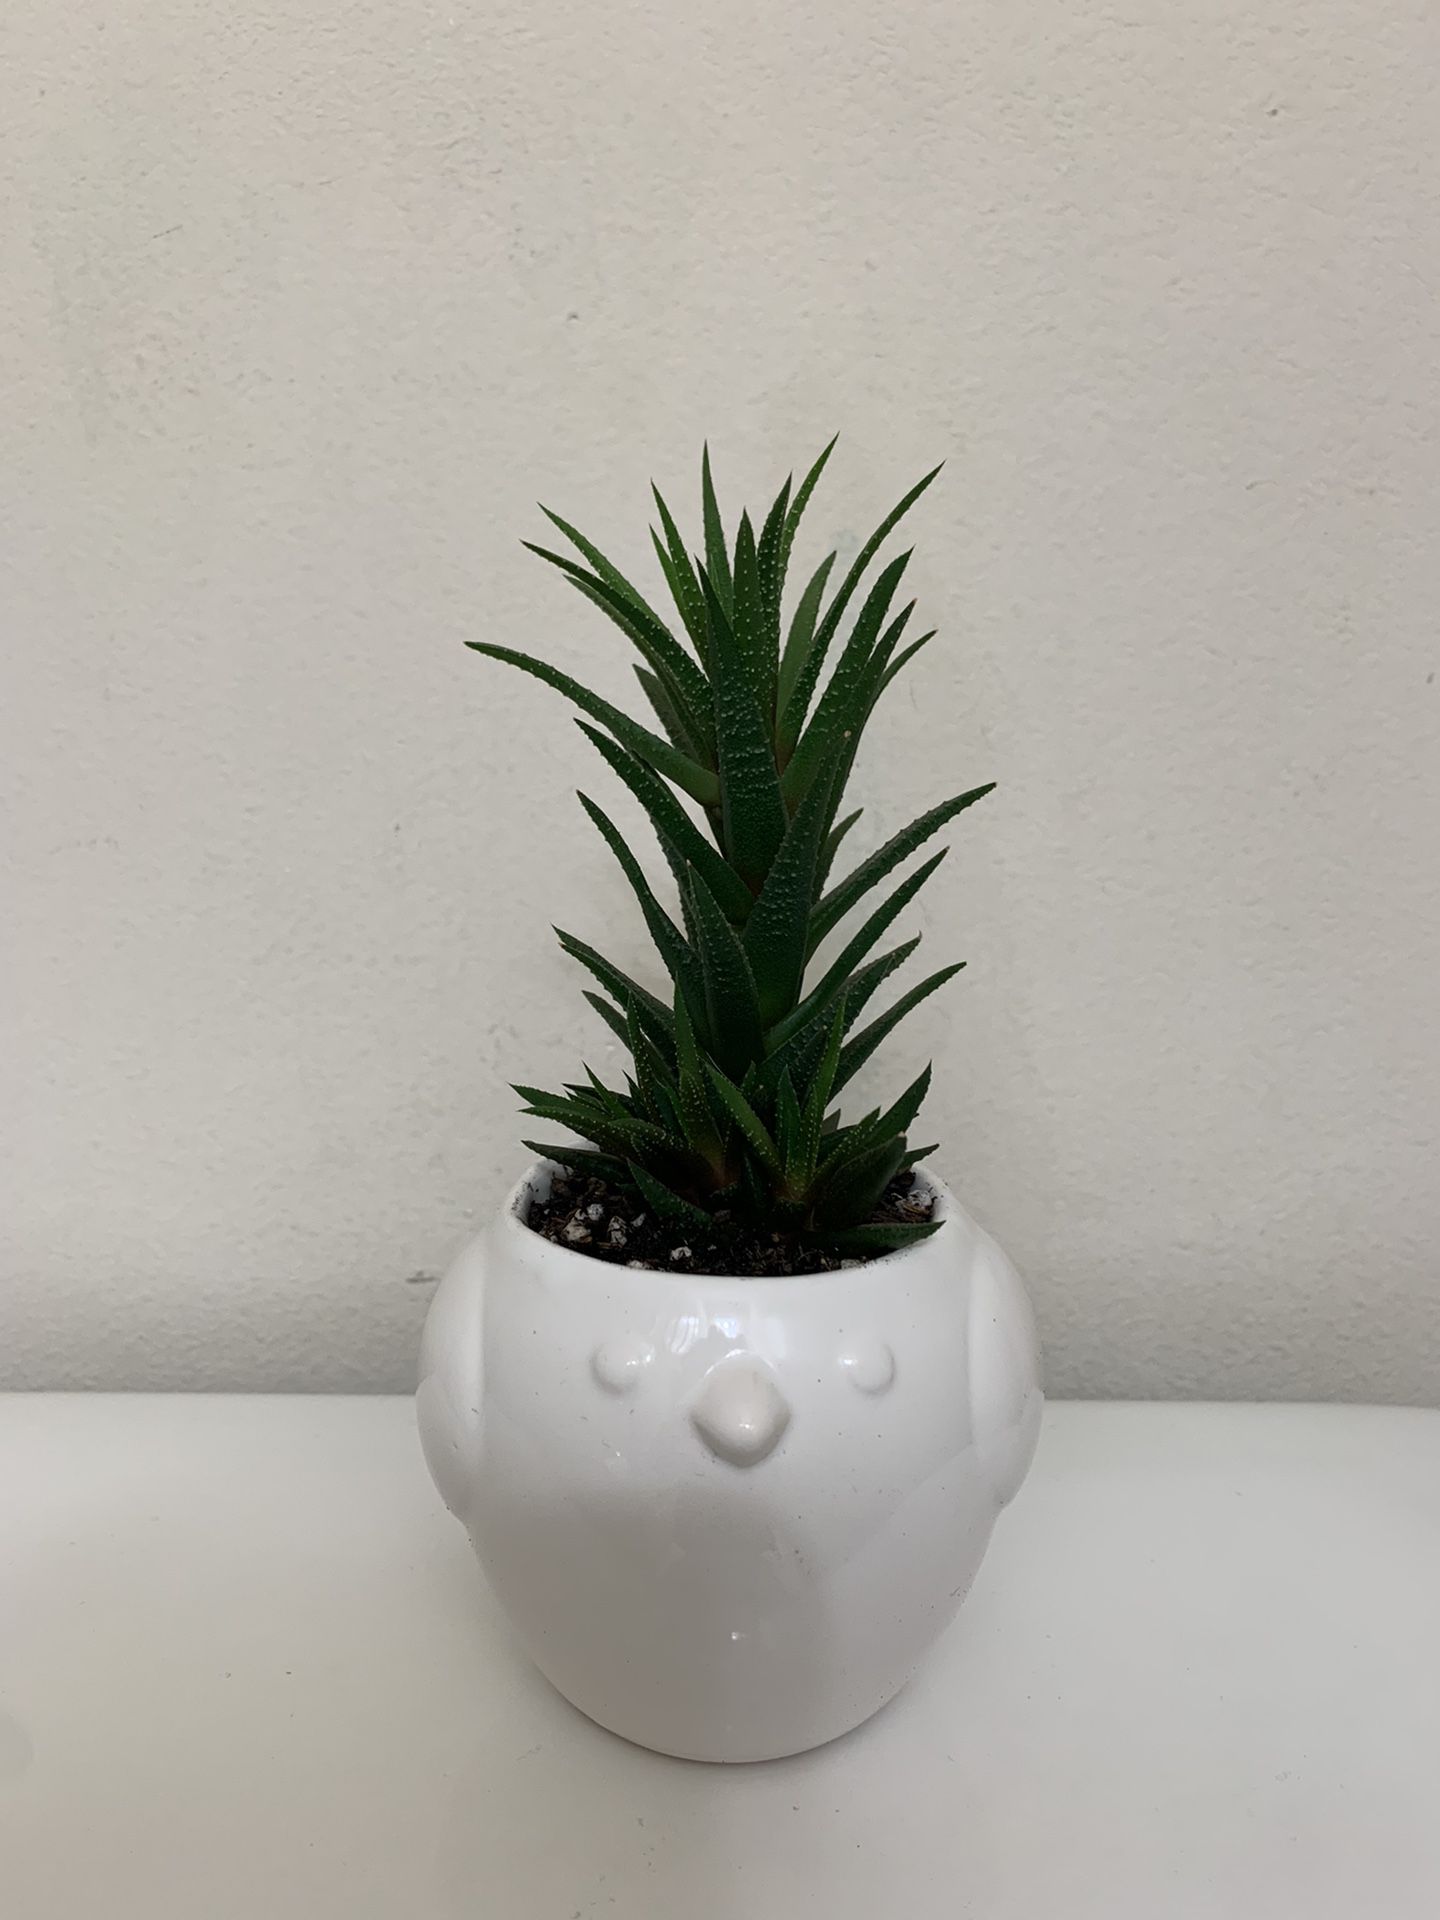 Live indoor Haworthia Plant in a Ceramic Pot with Drainage